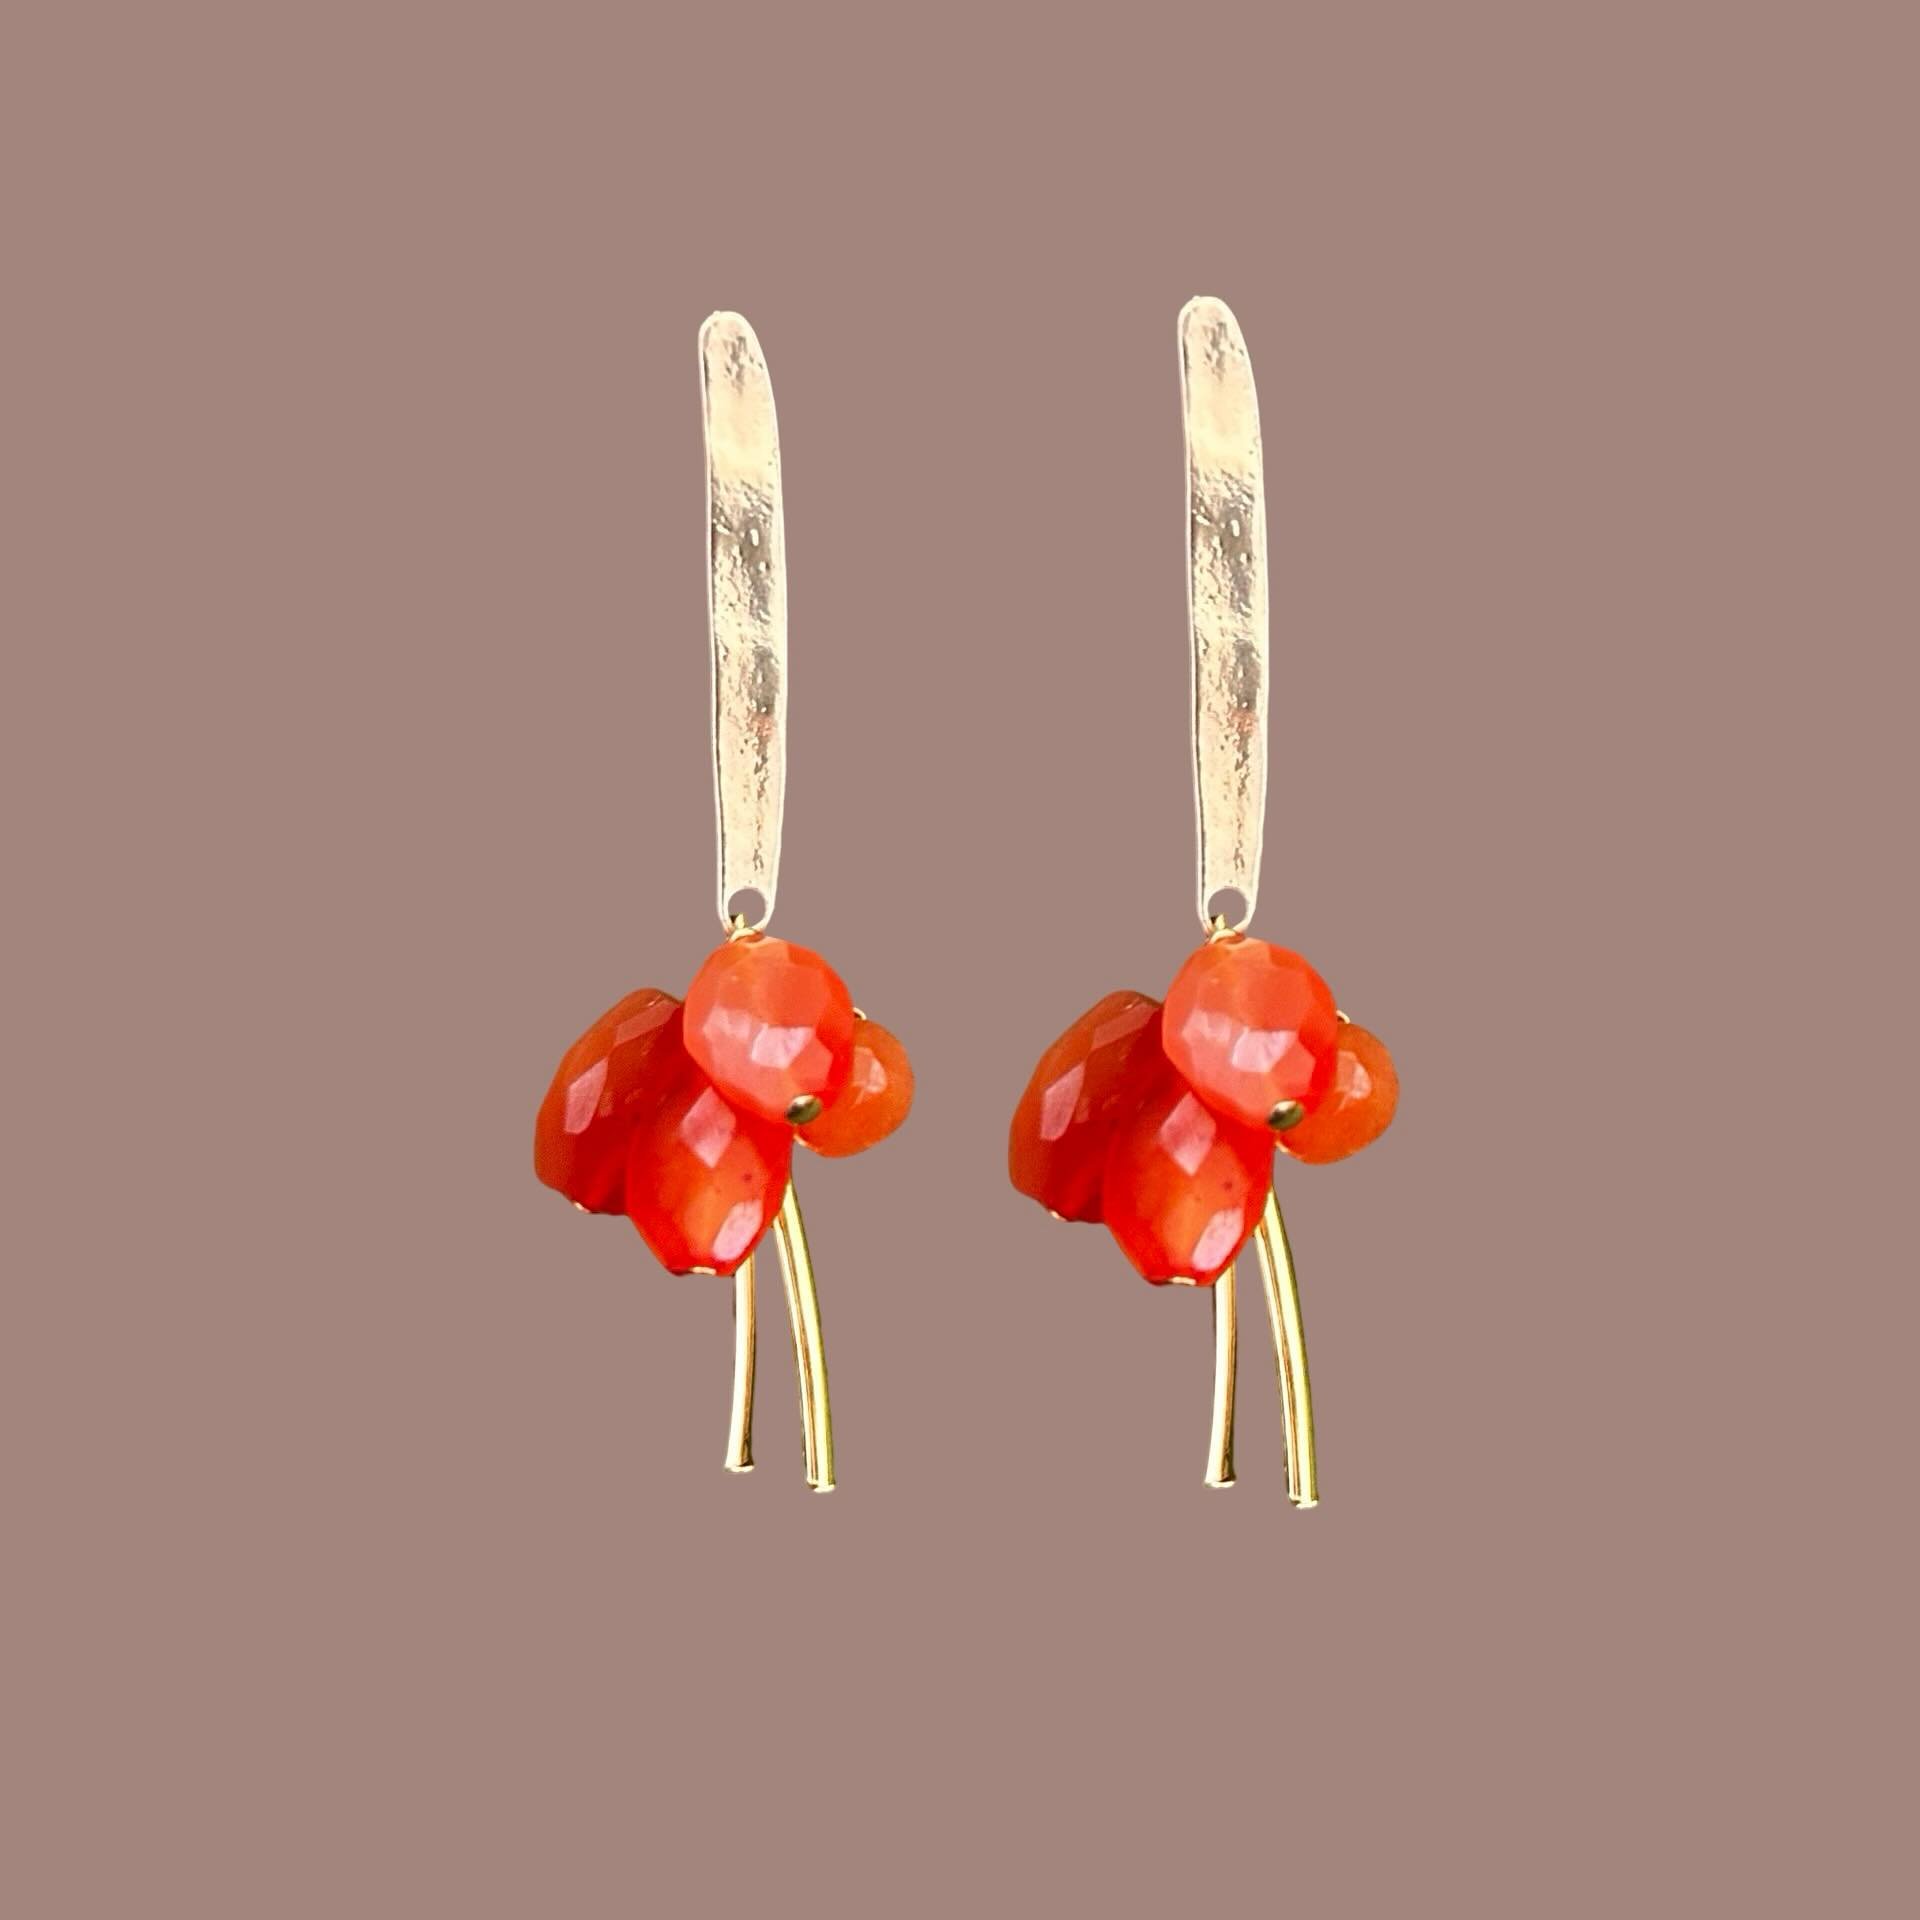 A recent trip to Mexico has bougainvillea lingering in my brain. The orange blossoms were that kind of electric orange that you can find in carnelian stones. So naturally I came home to make you some bougainvillea earrings, in time for Mother&rsquo;s